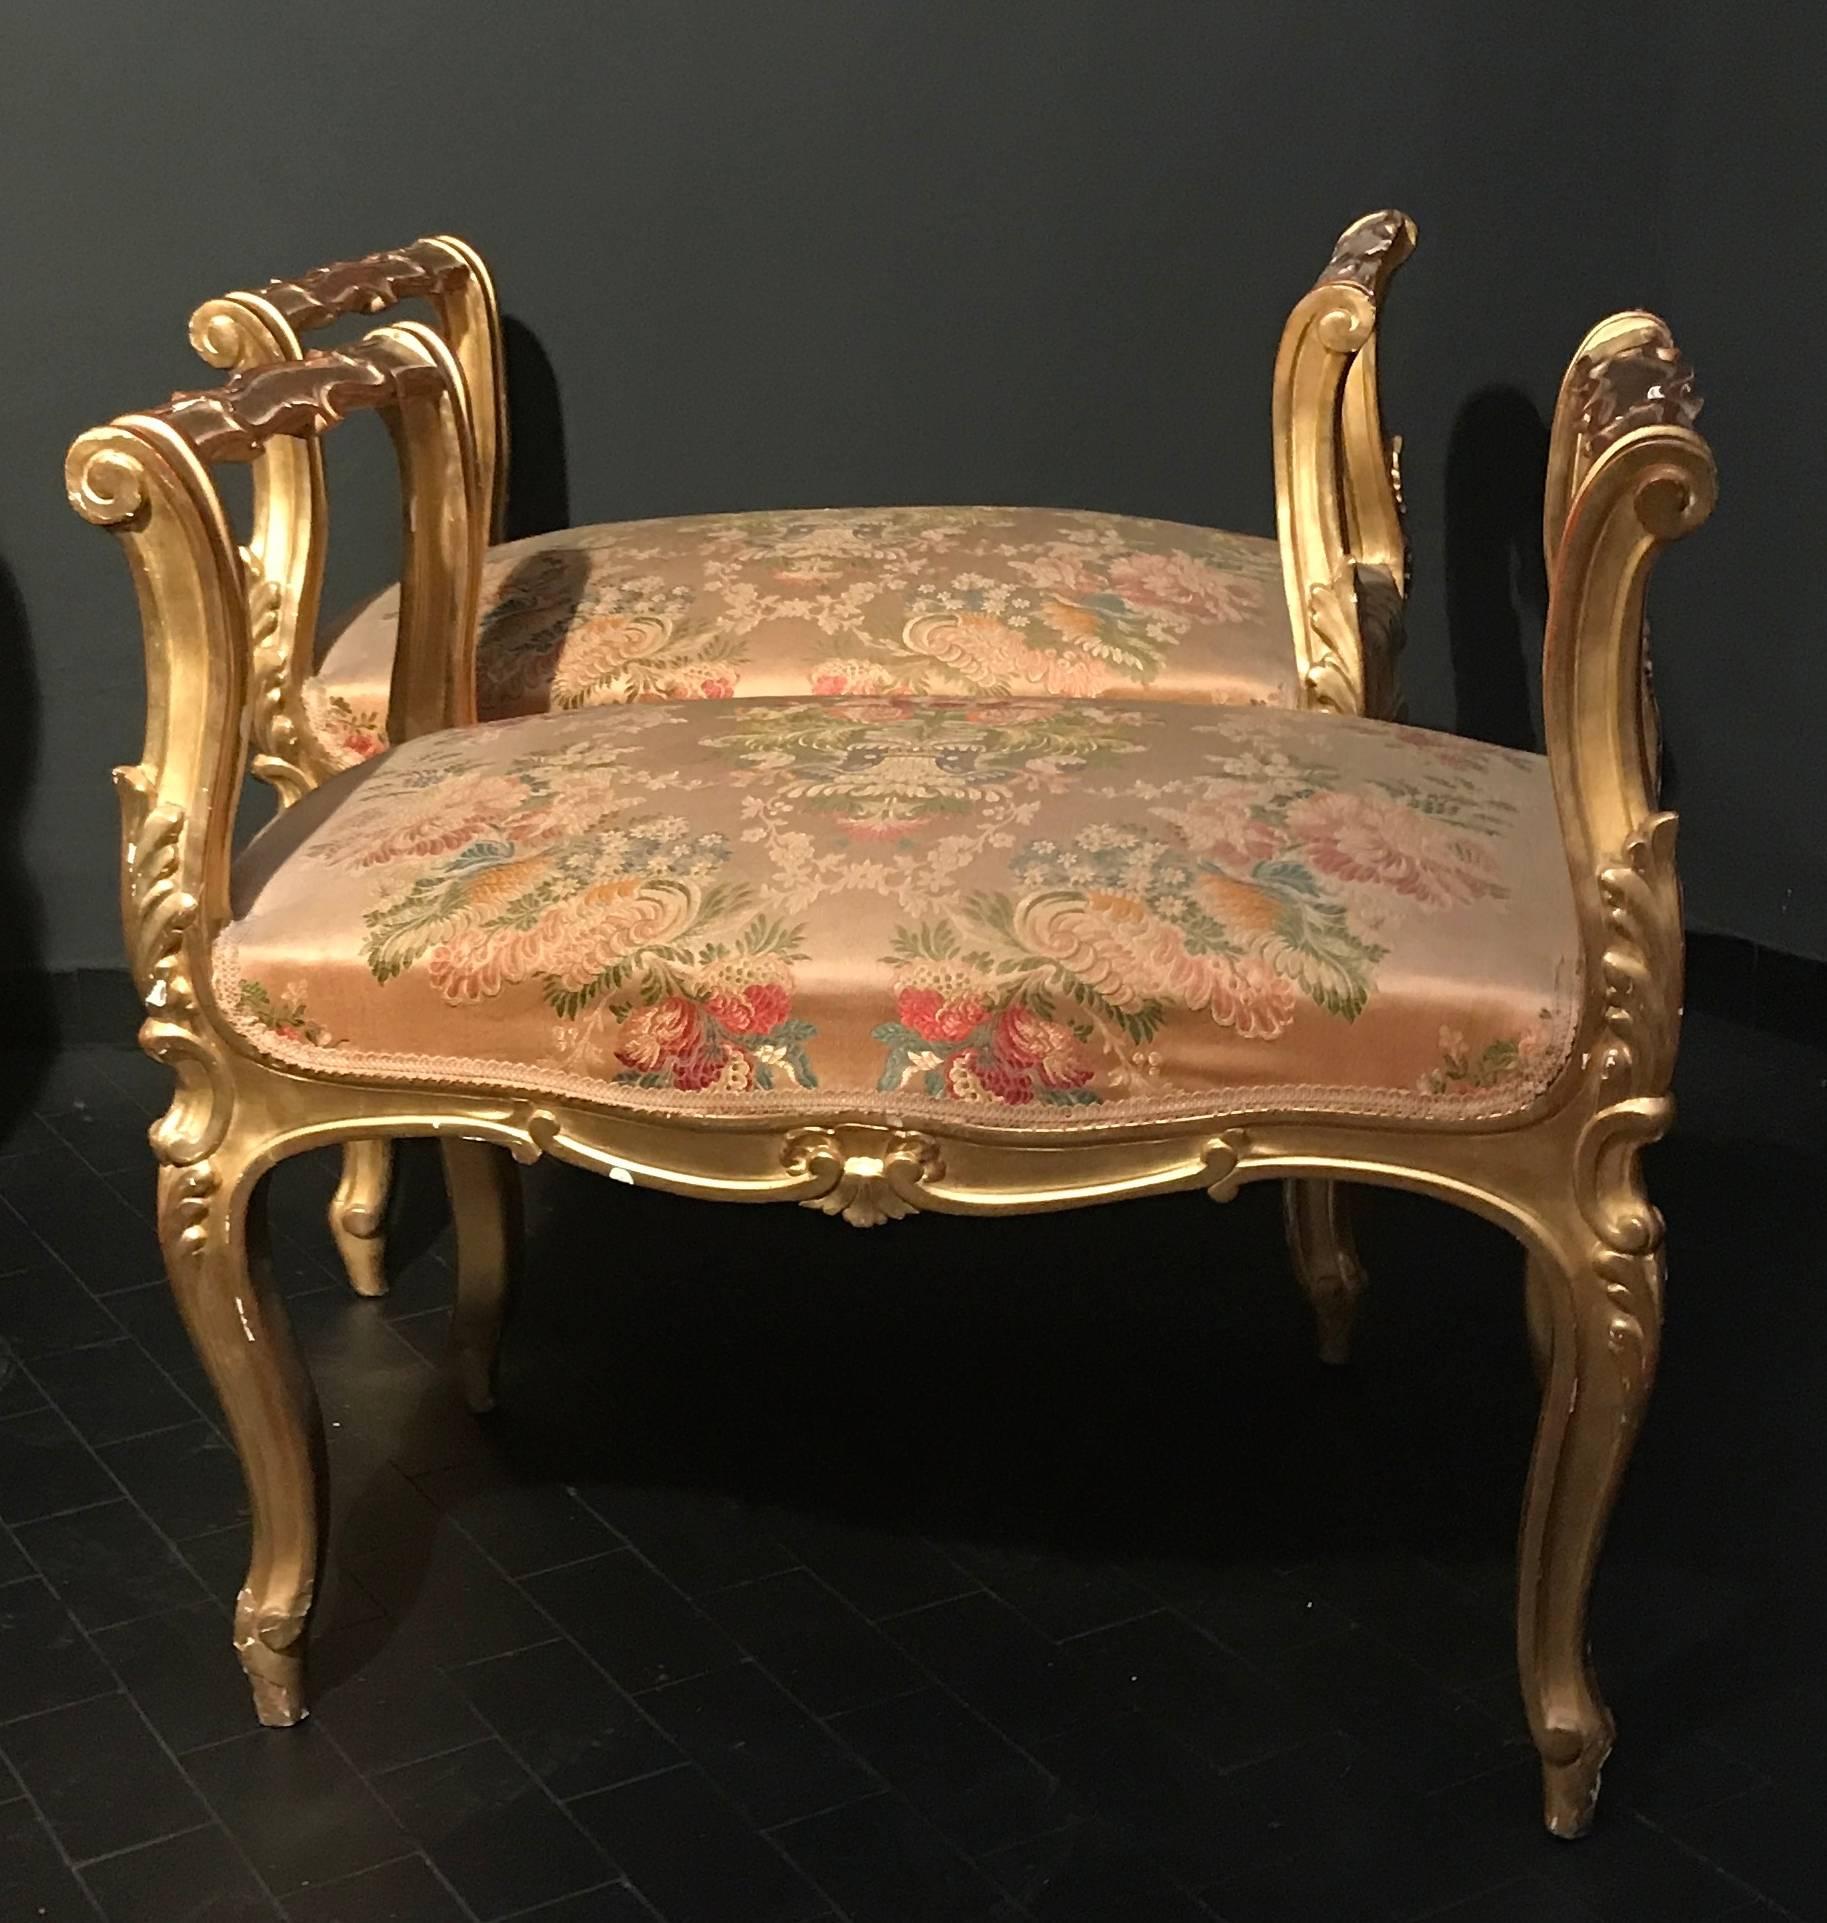 This extraordinary and finely carved Benches with original gilding.
It's part of an eleven piece s salon set published 1stDibs Reference #:
LU985910554043
Provenience from a Sicilian Aristocratic residence
Sofa measurements:
Height: 70
Width